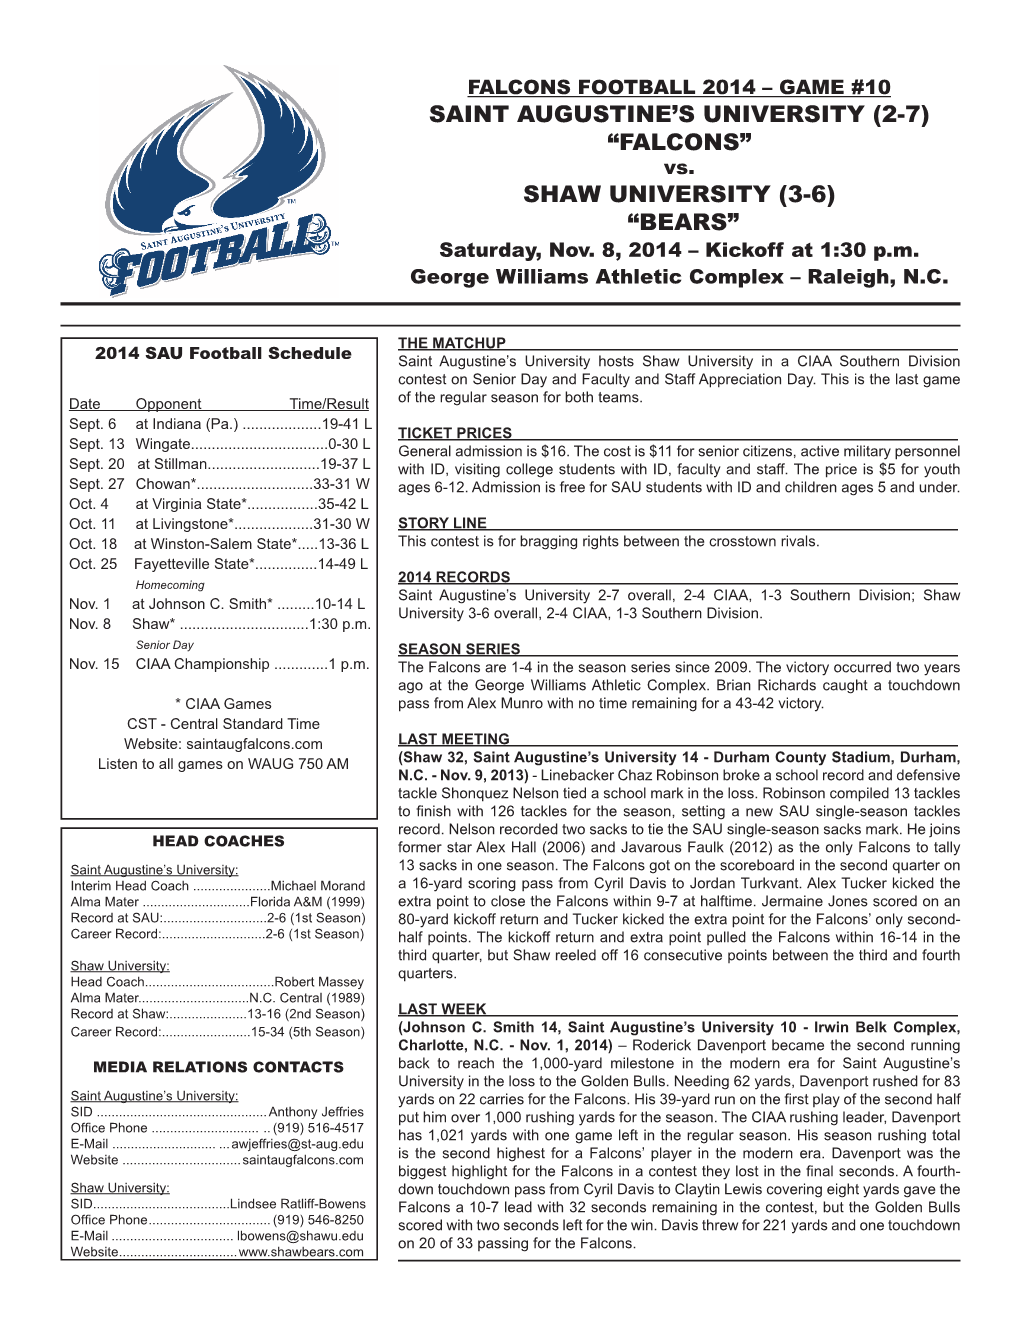 Football Game Notes.Indd